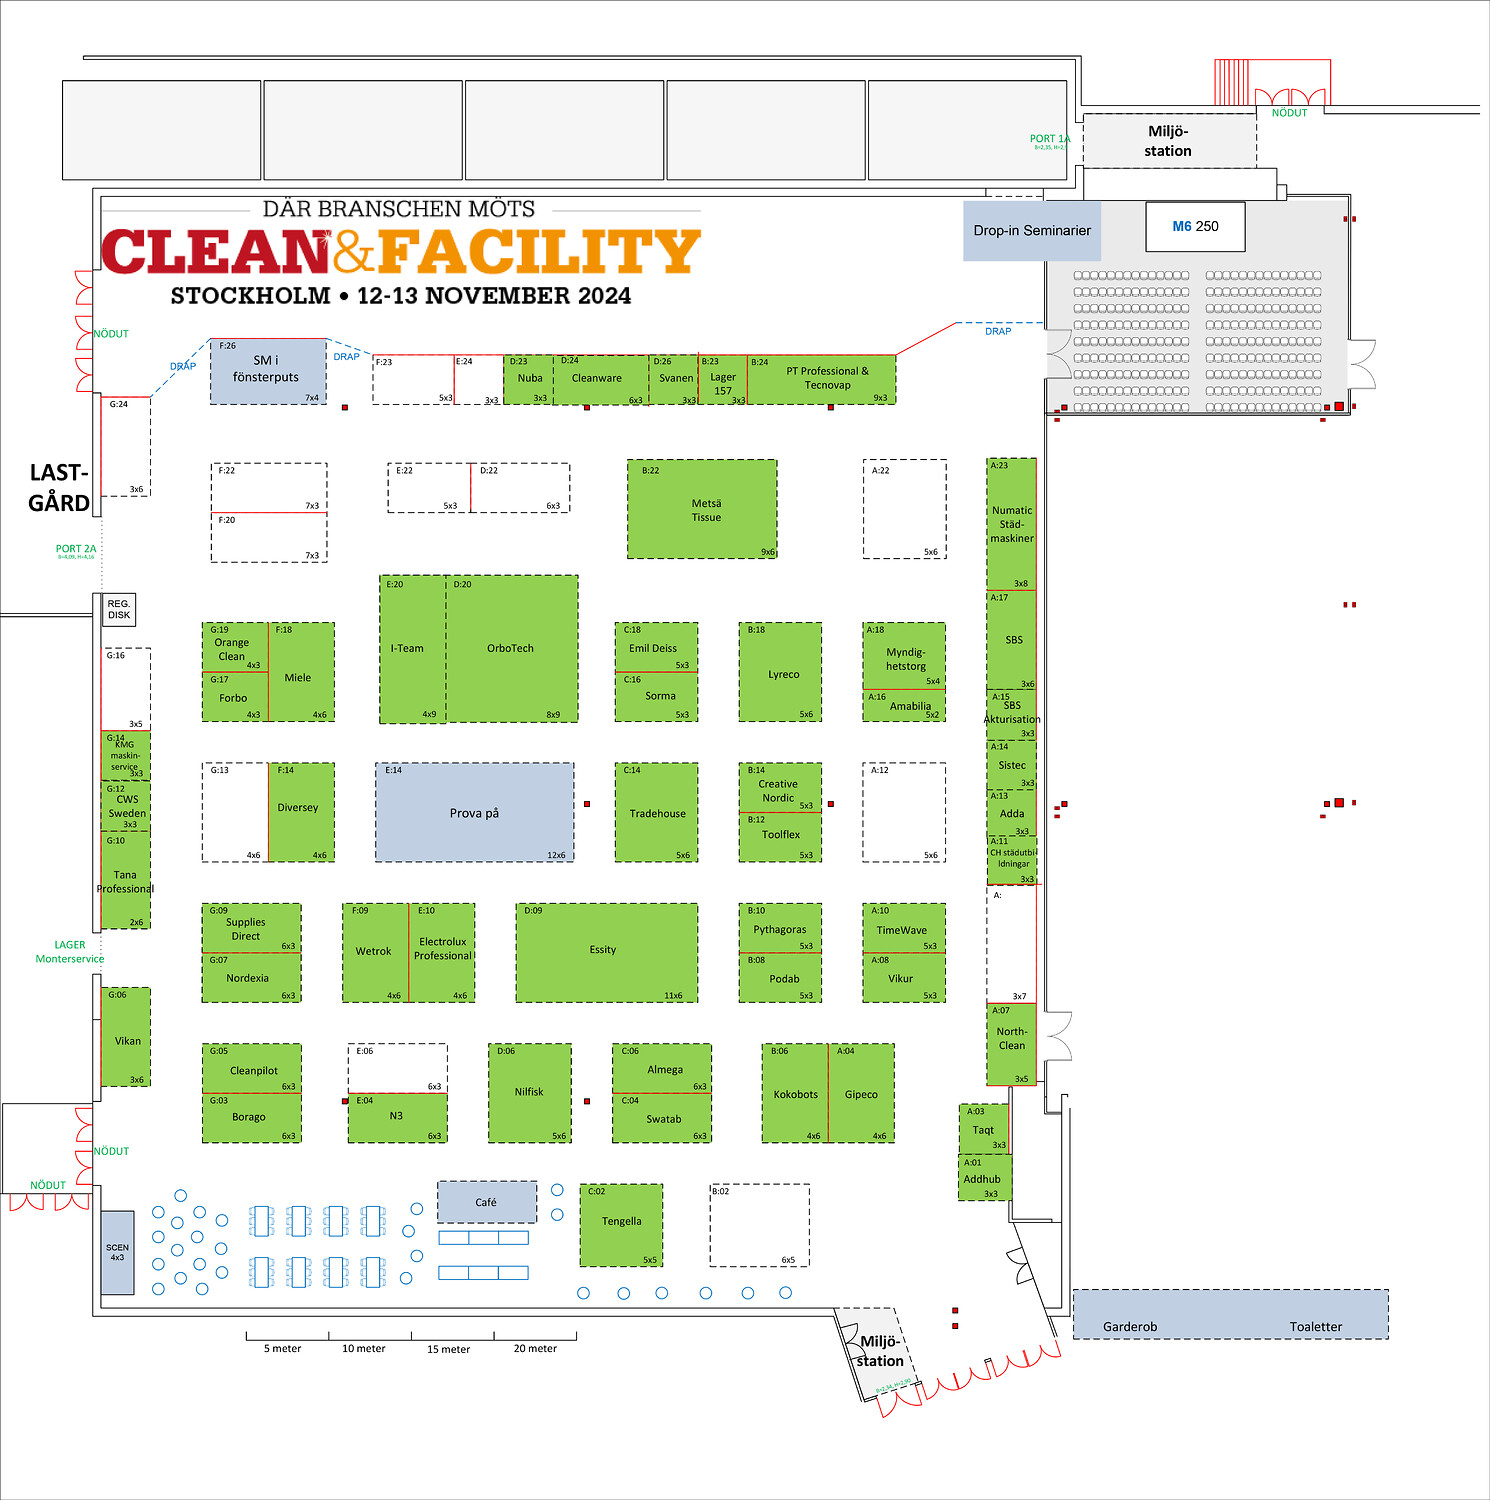 Clean & Facility 2024 hall overview